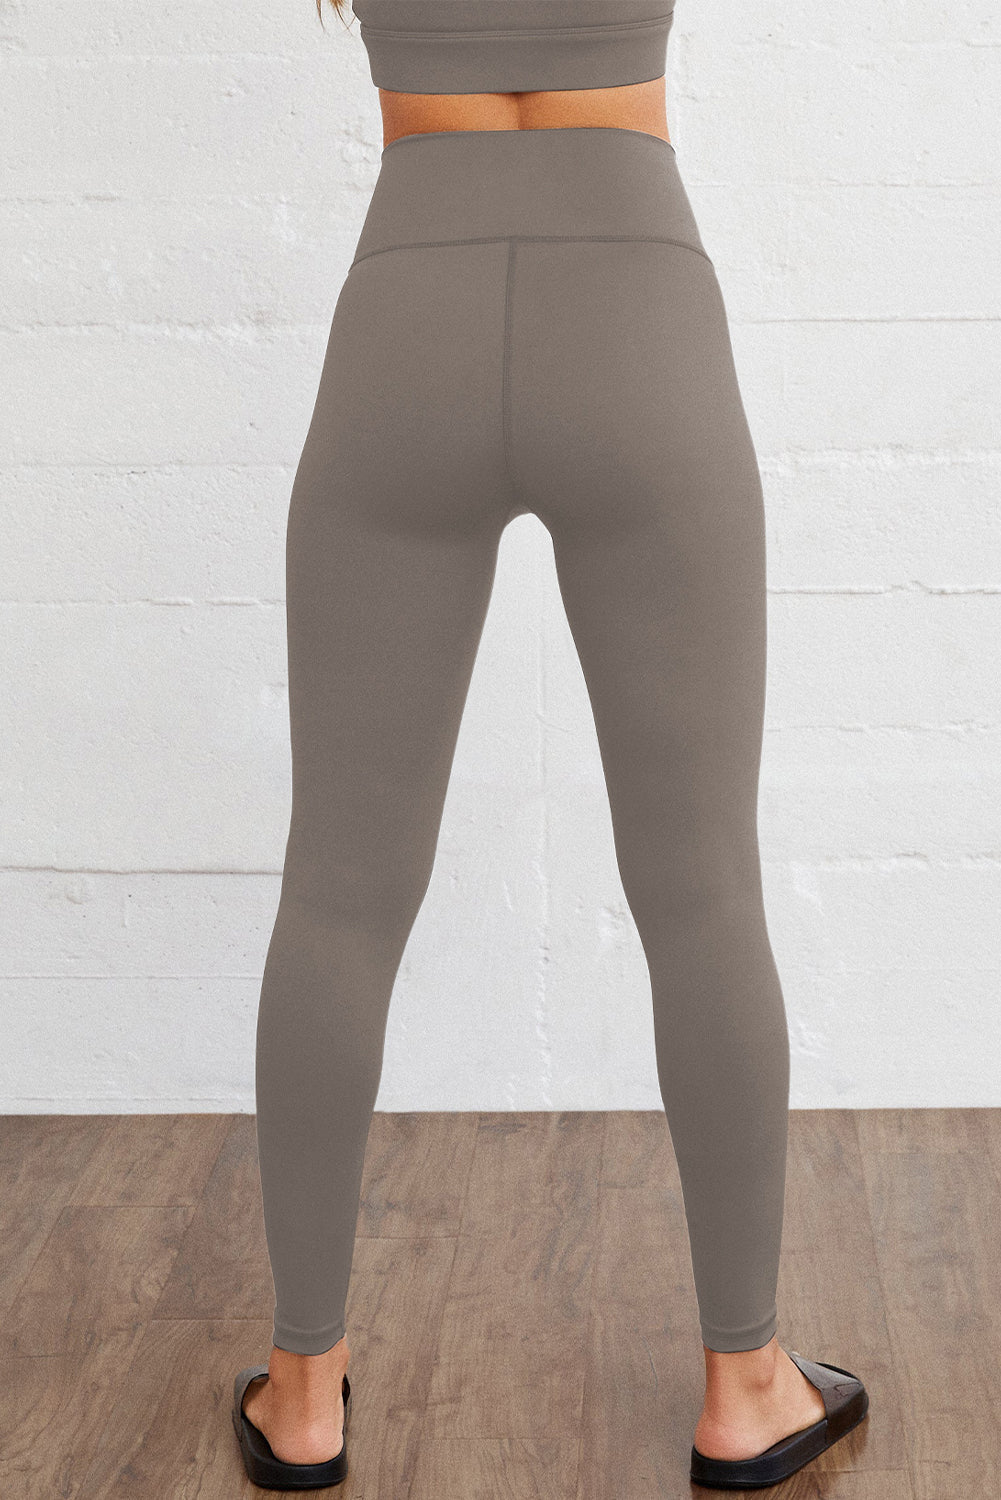 Black or Gray - Arched Waist Seamless Active Leggings - Sizes S-XL Ti Amo I love you